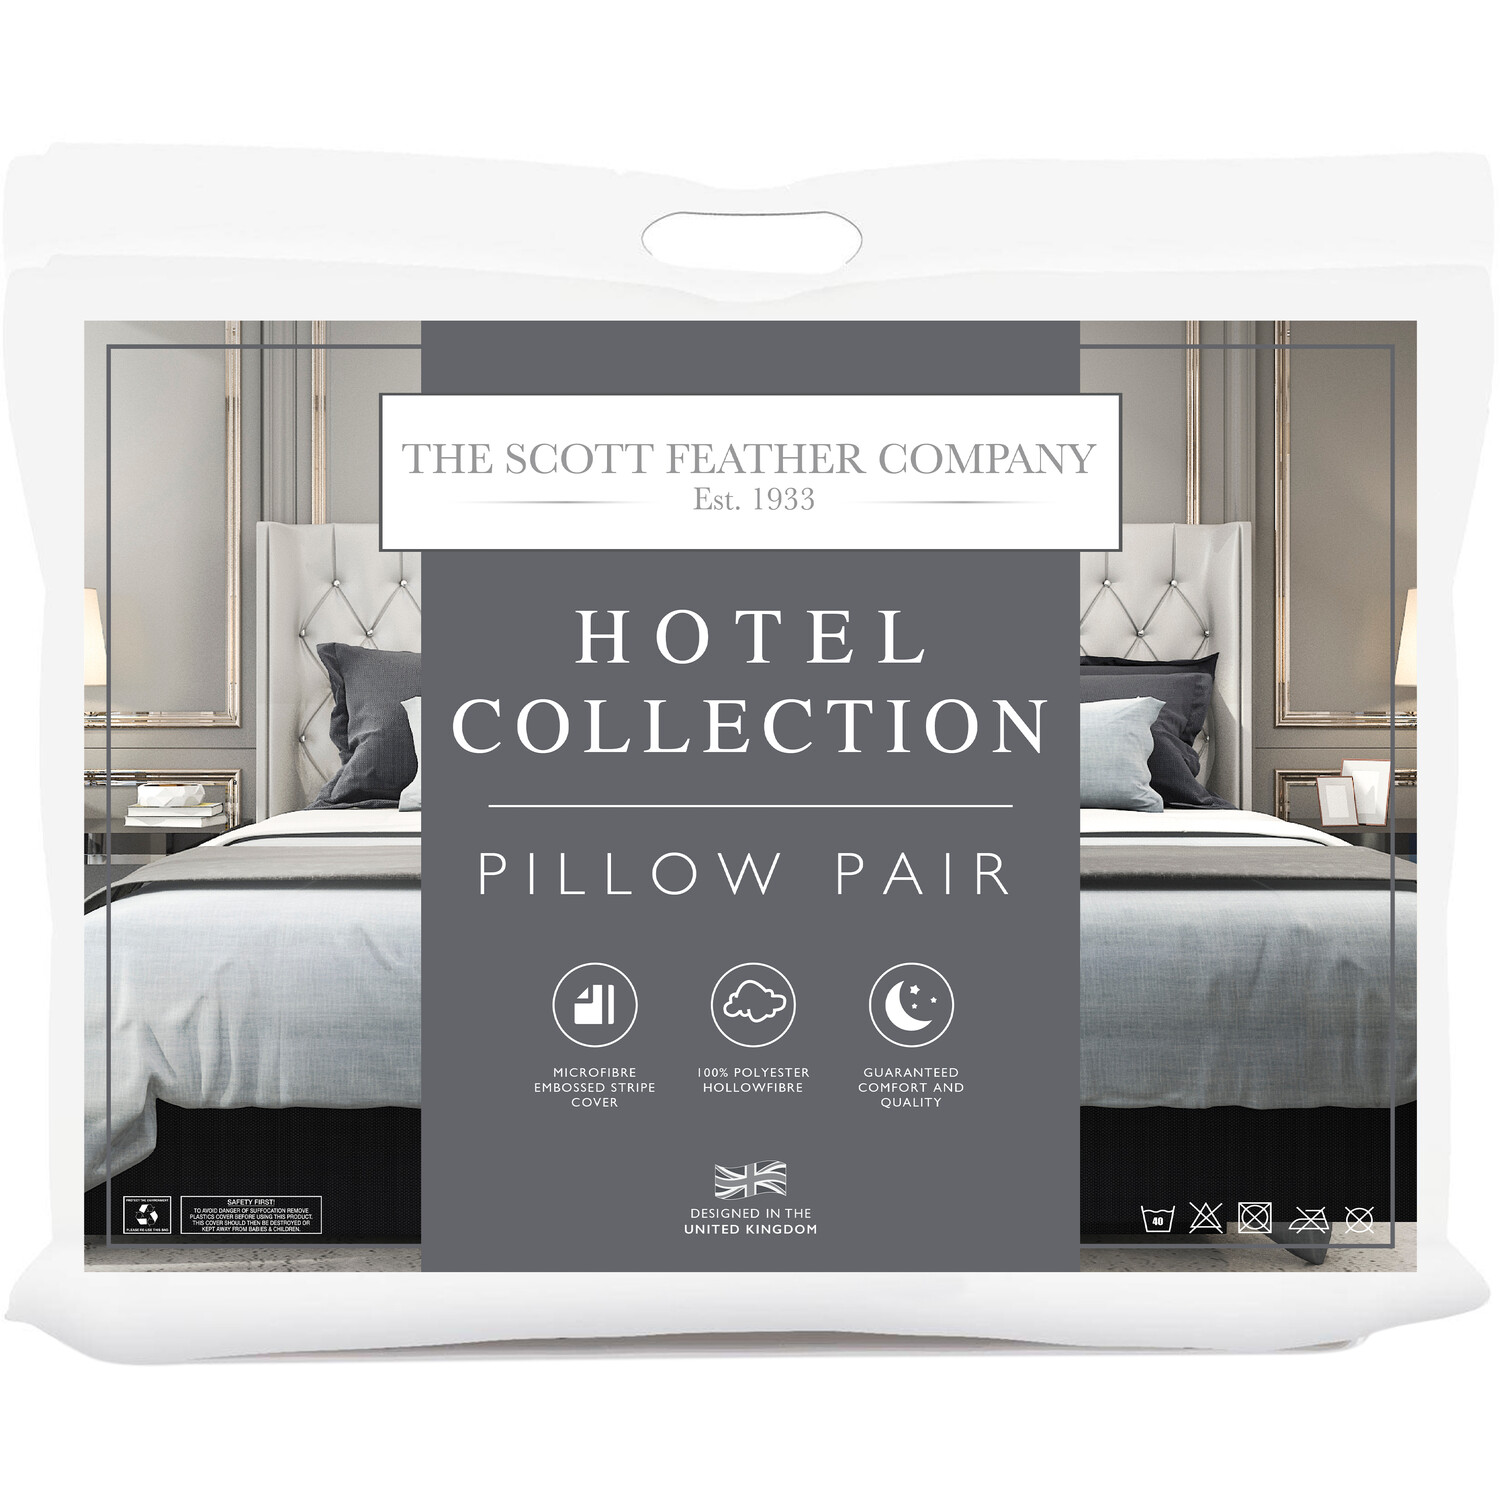 The Scott Feather Company Hotel Collection Pillow Pair Image